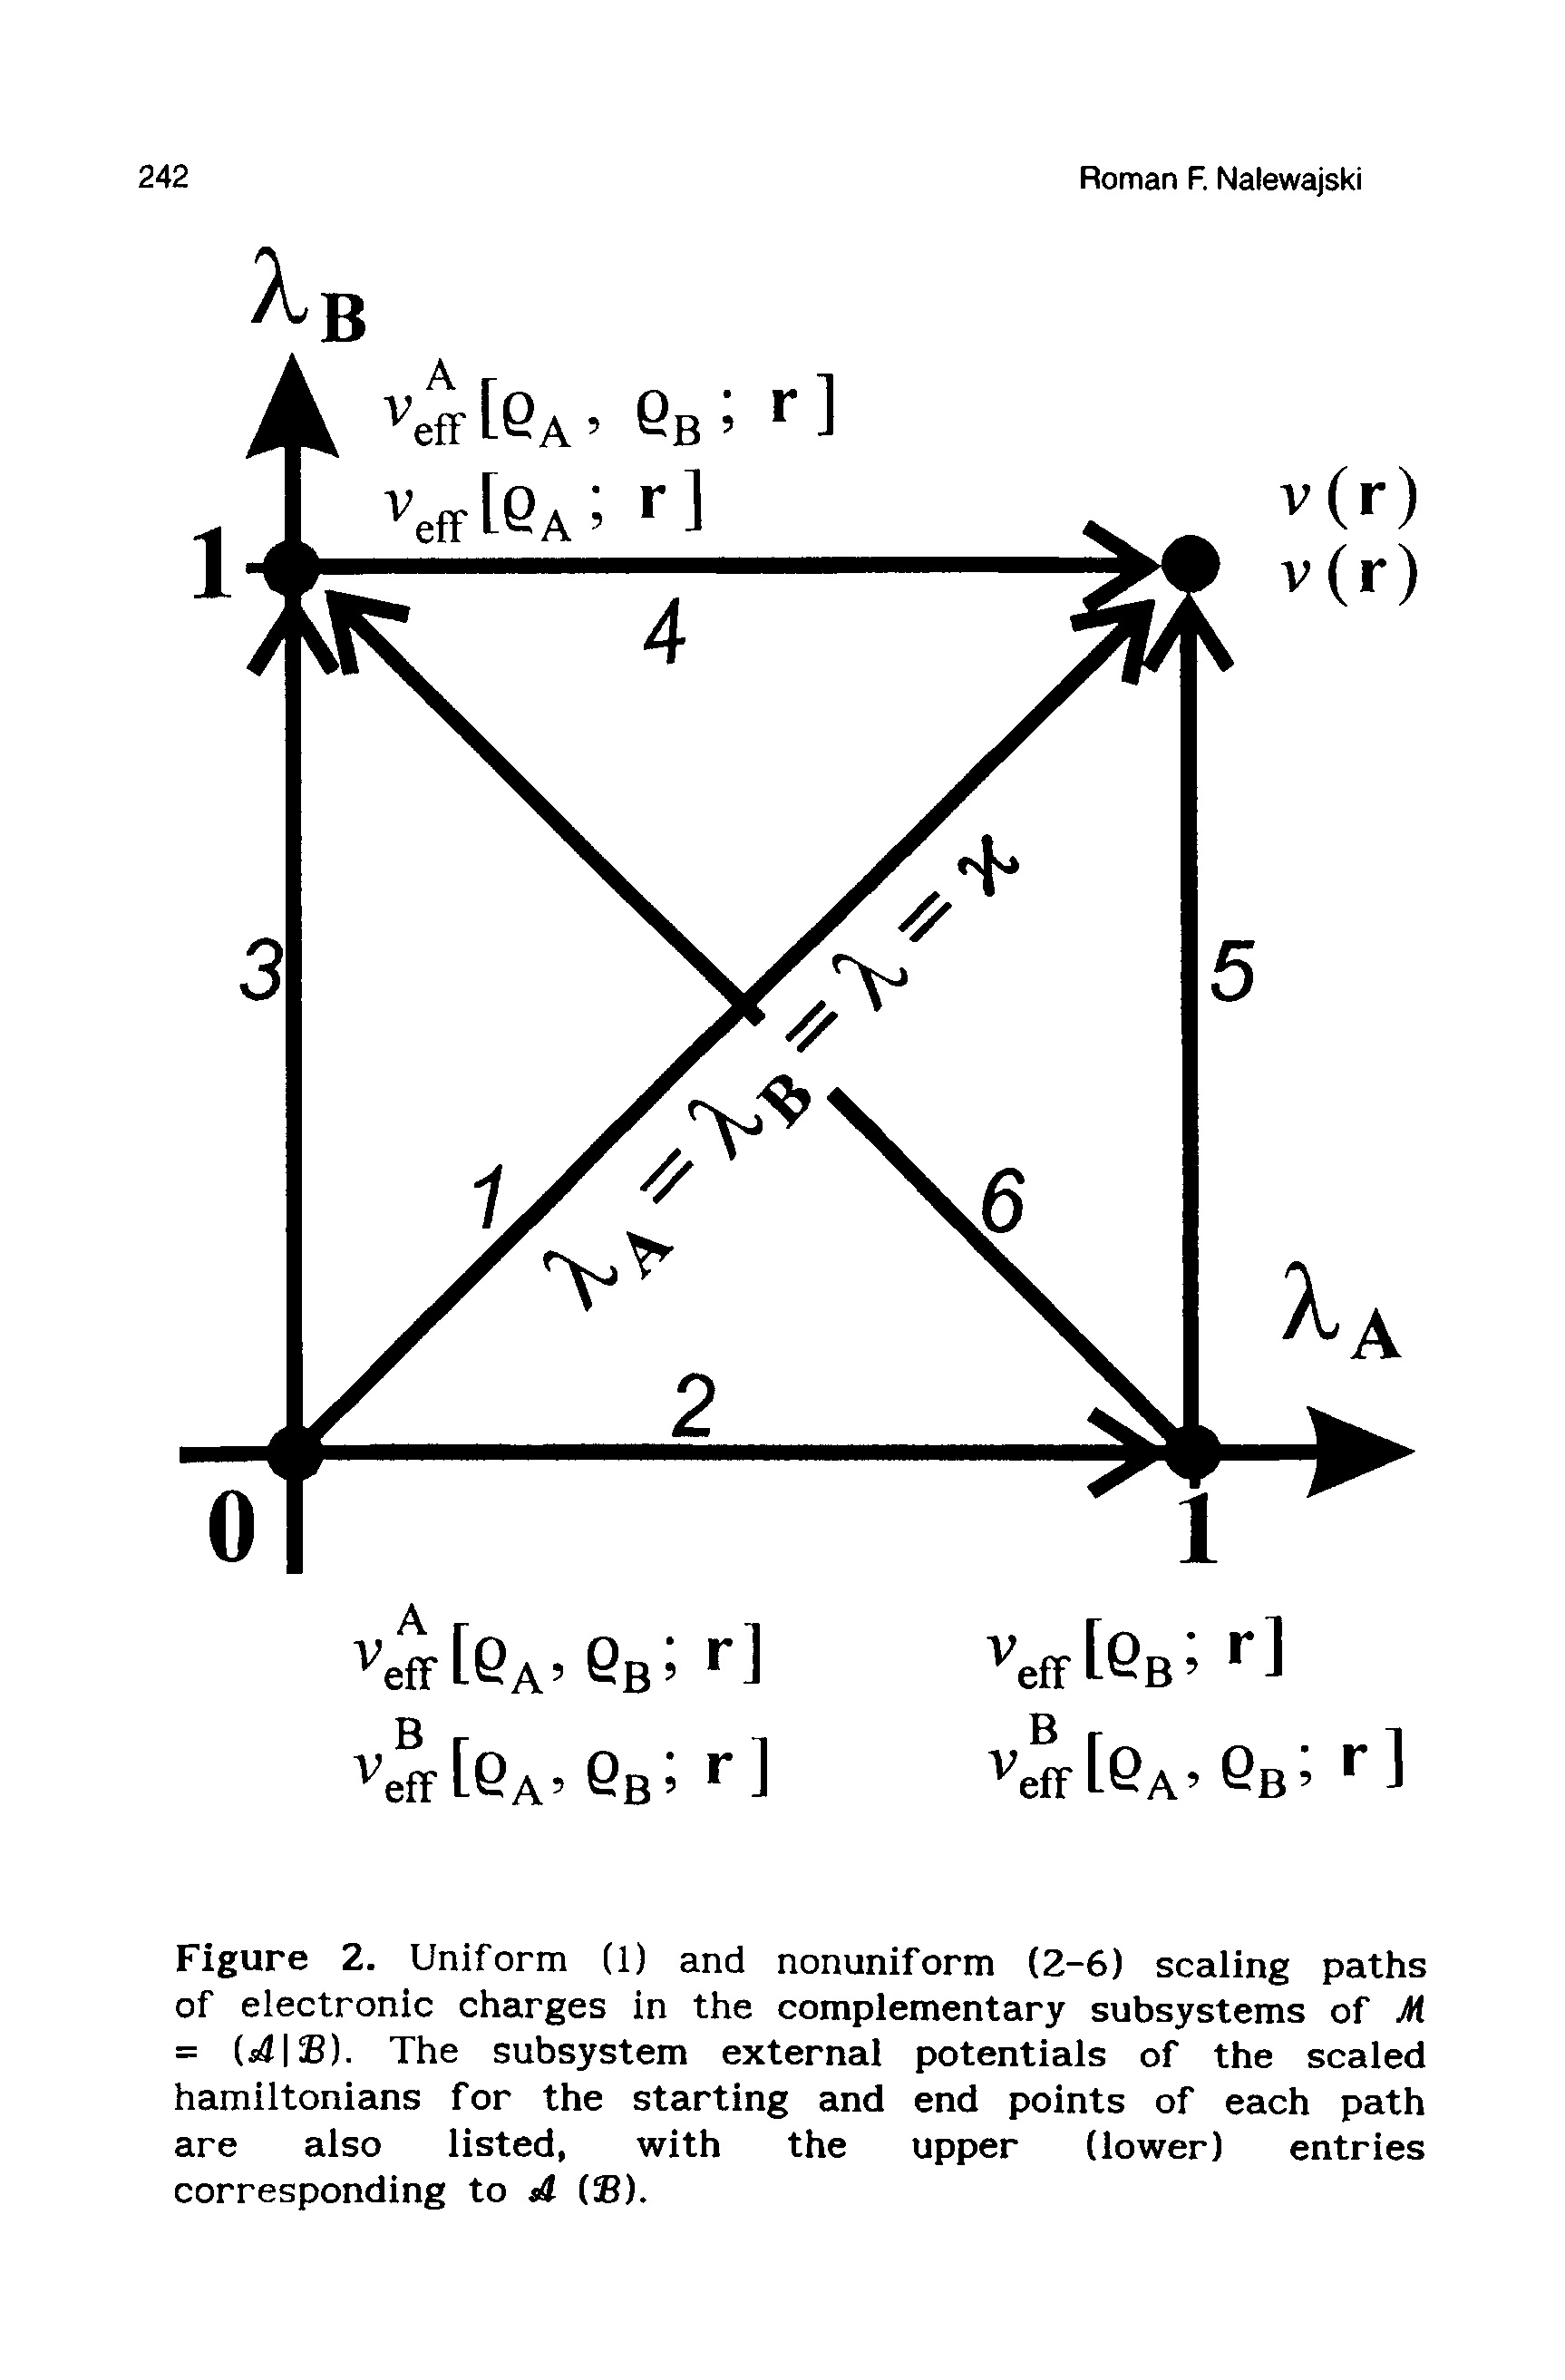 Figure 2. Uniform (1) and nonuniform (2-6) scaling paths of electronic charges in the complementary subsystems of M = (i4 B). The subsystem external potentials of the scaled hamiltonians for the starting and end points of each path are also listed, with the upper (lower) entries corresponding to ti (B).